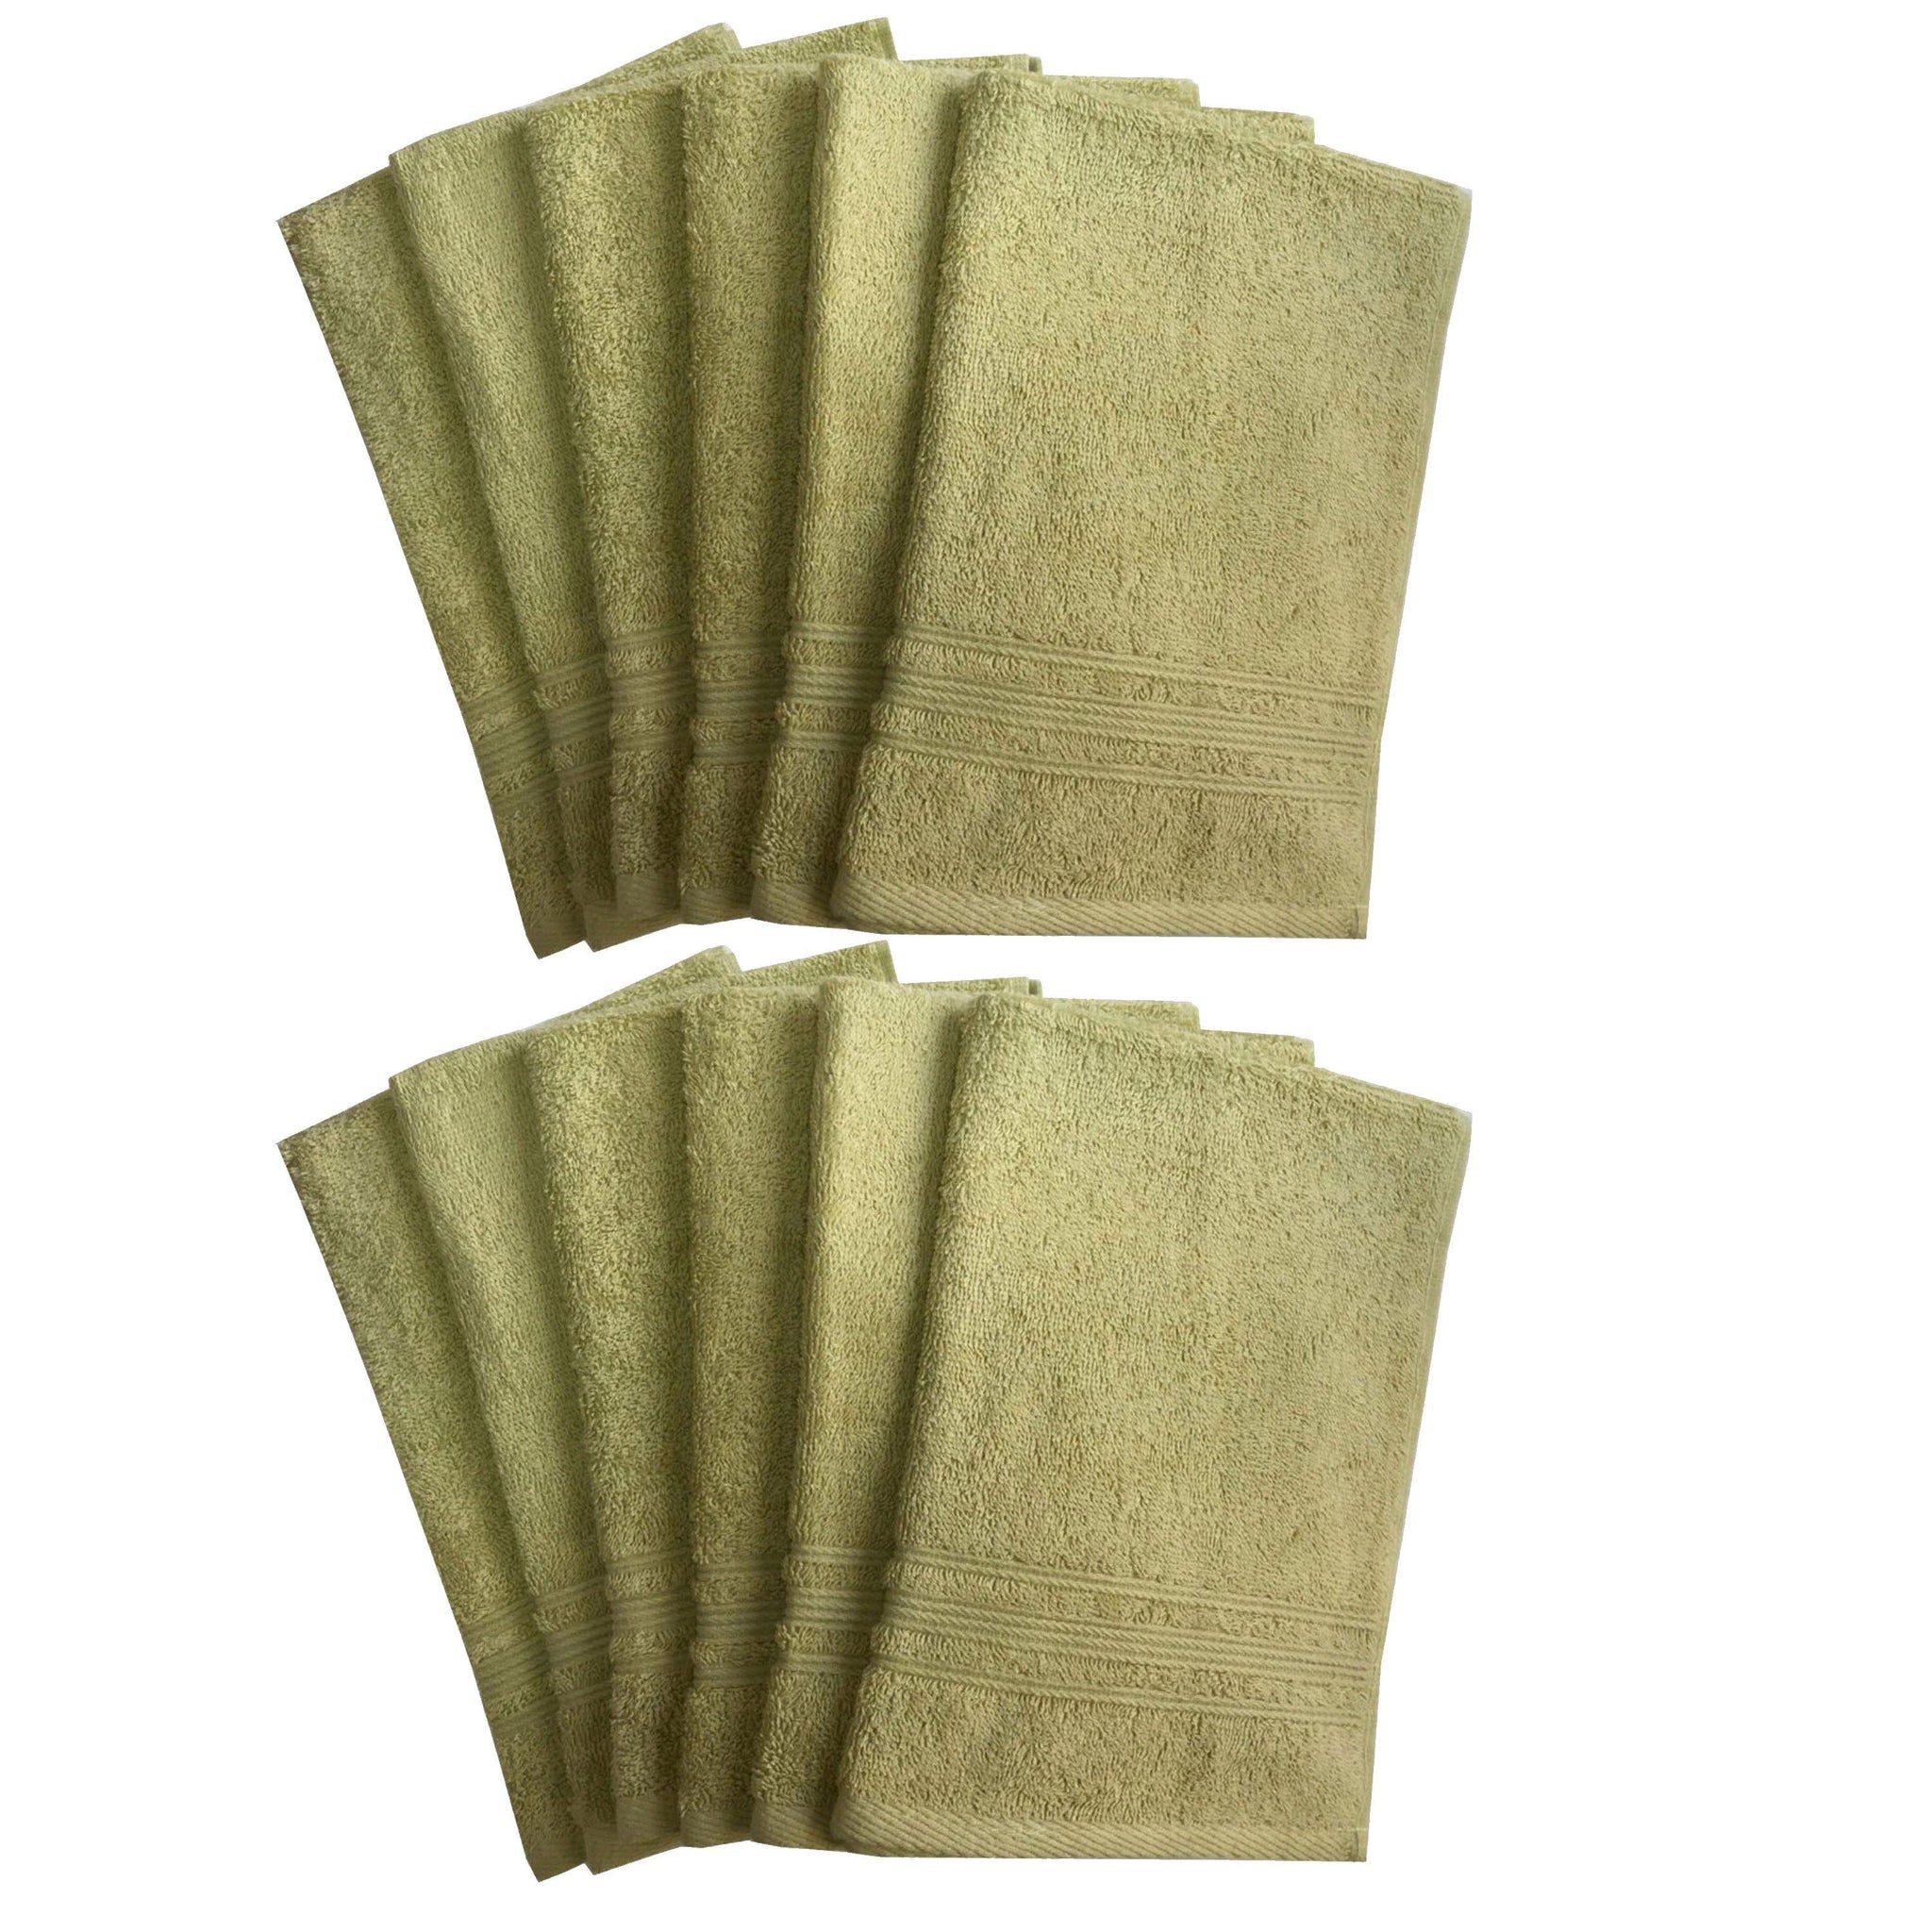 Lushomes Shadow Green Super Soft and Fluffy Cotton Hand Towel Set (Size: 40 x 60 cms, Pack of 12, 450 GSM) - Lushomes